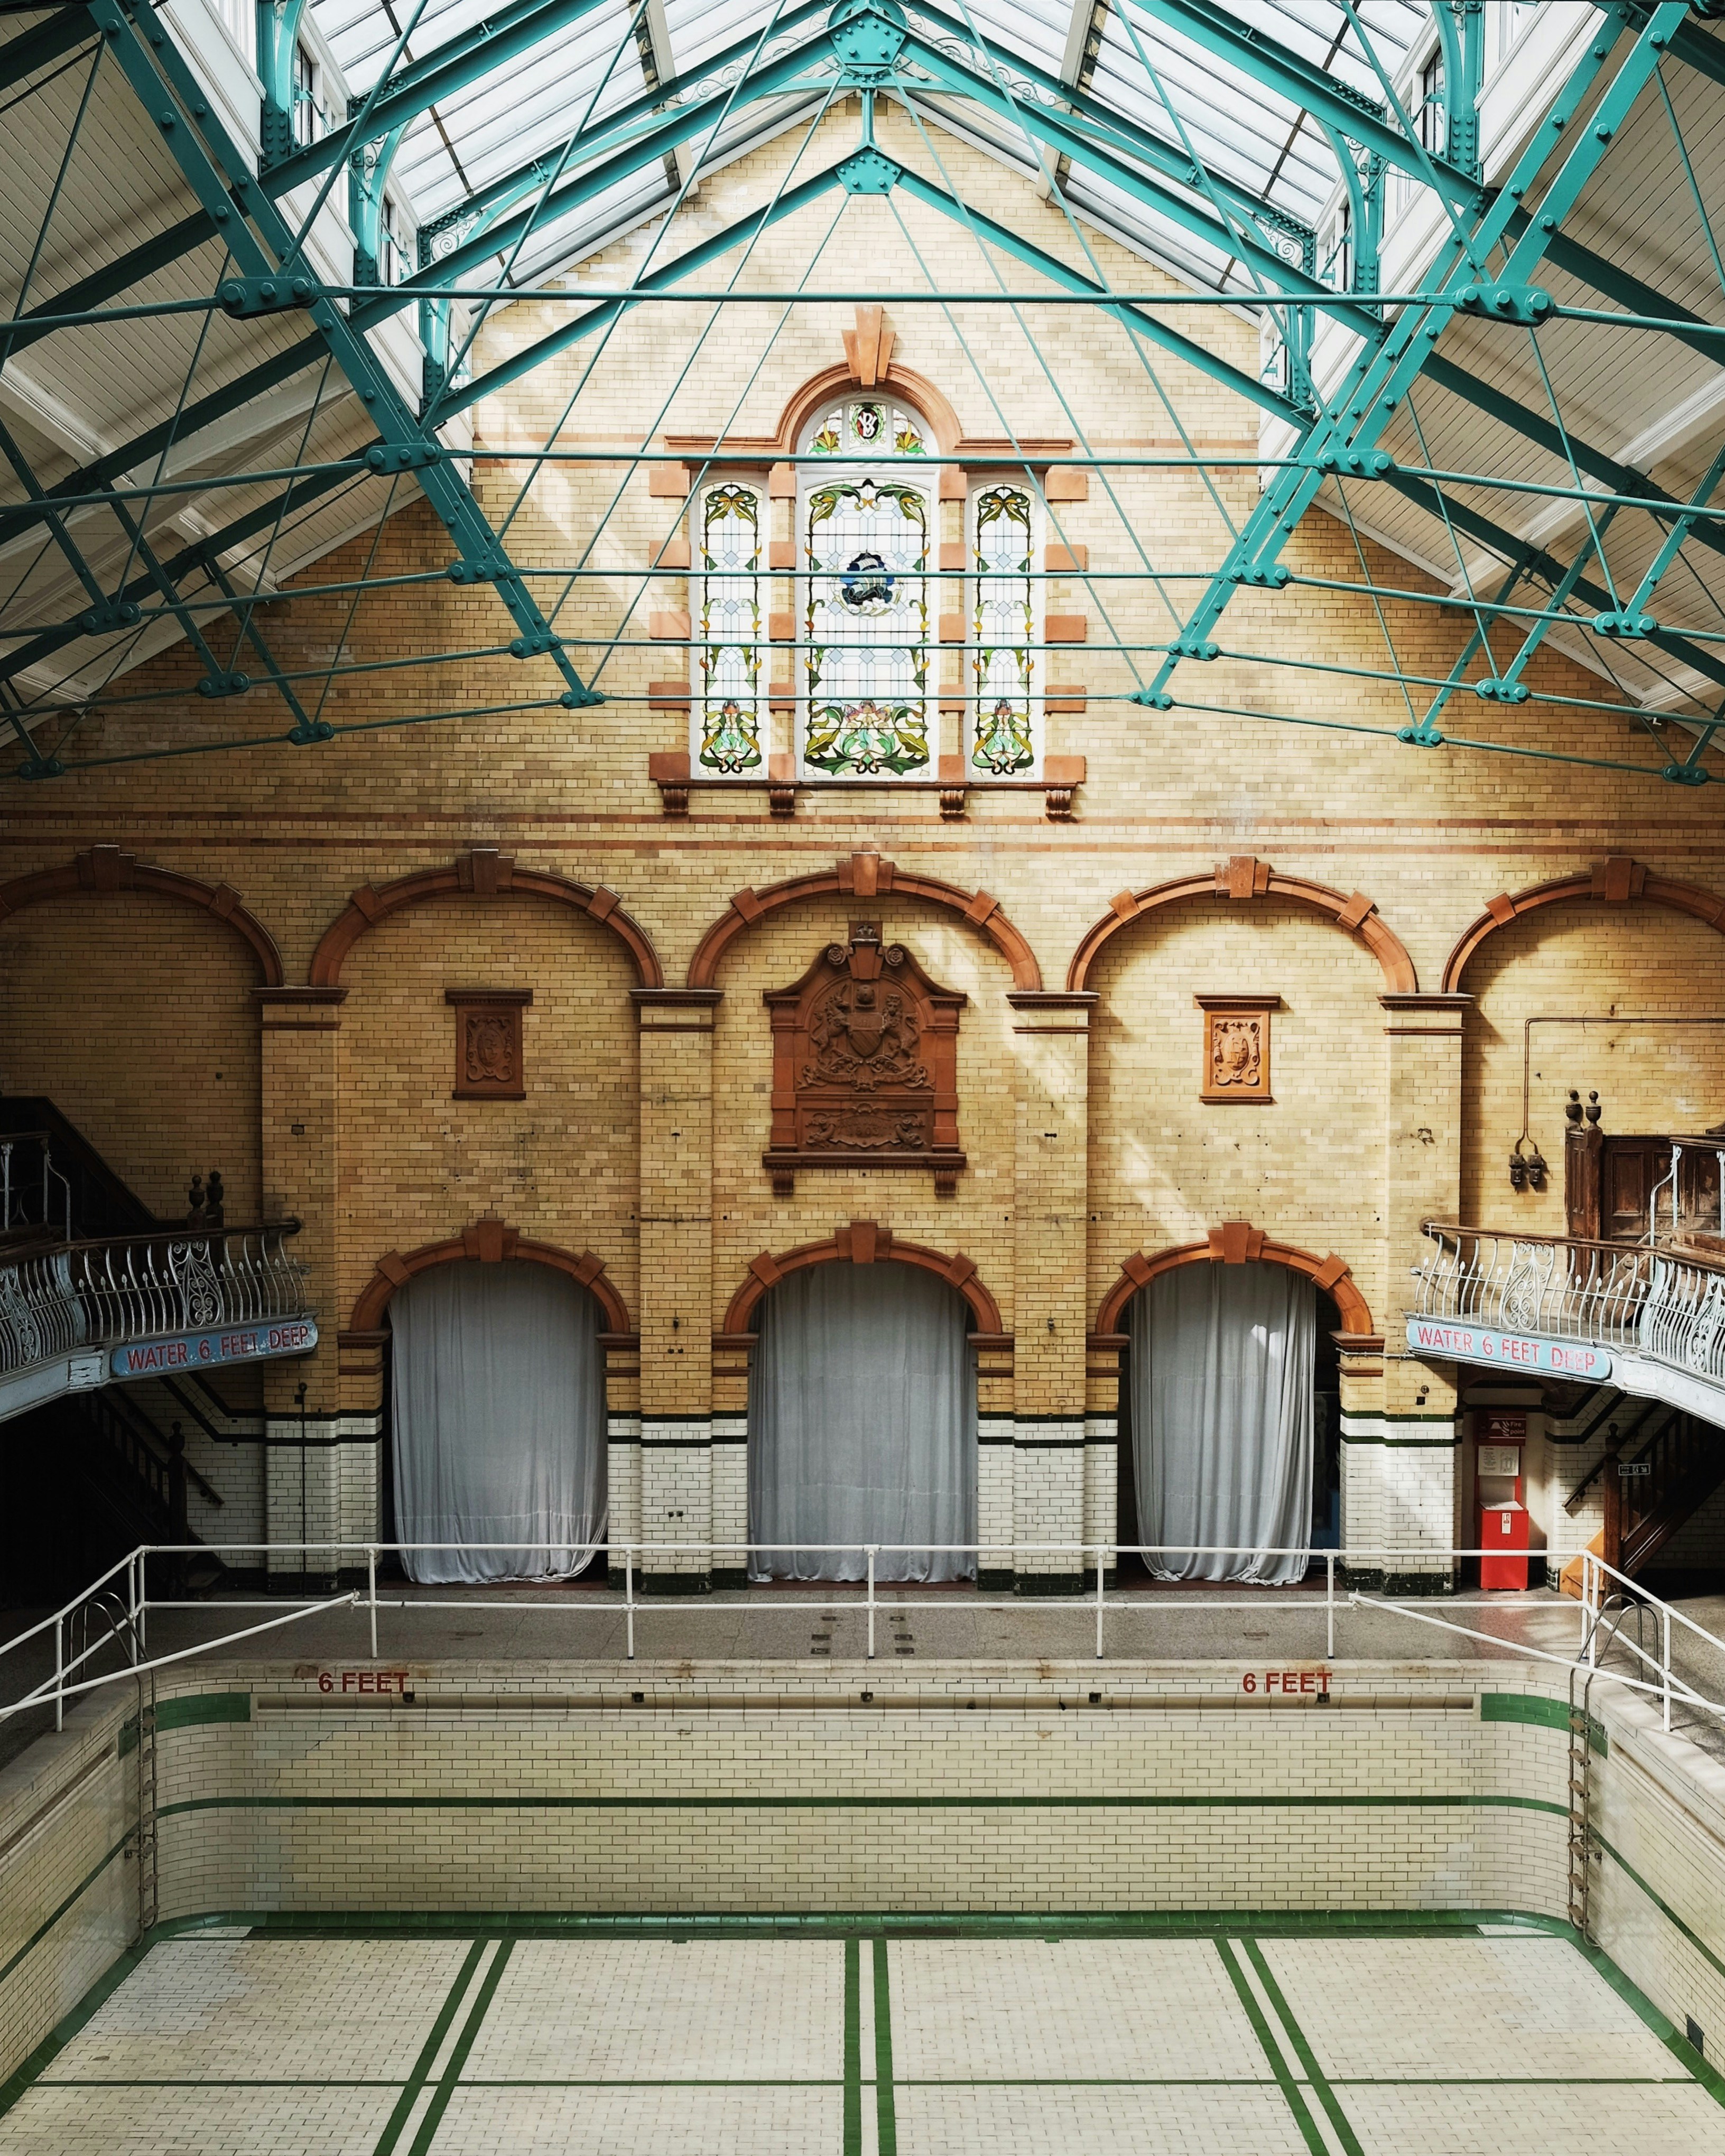 This photo was taken at Victoria Baths when I joined their weekly tour which takes place on Wednesday afternoons. More details can be found at: www.victoriabaths.org.uk/